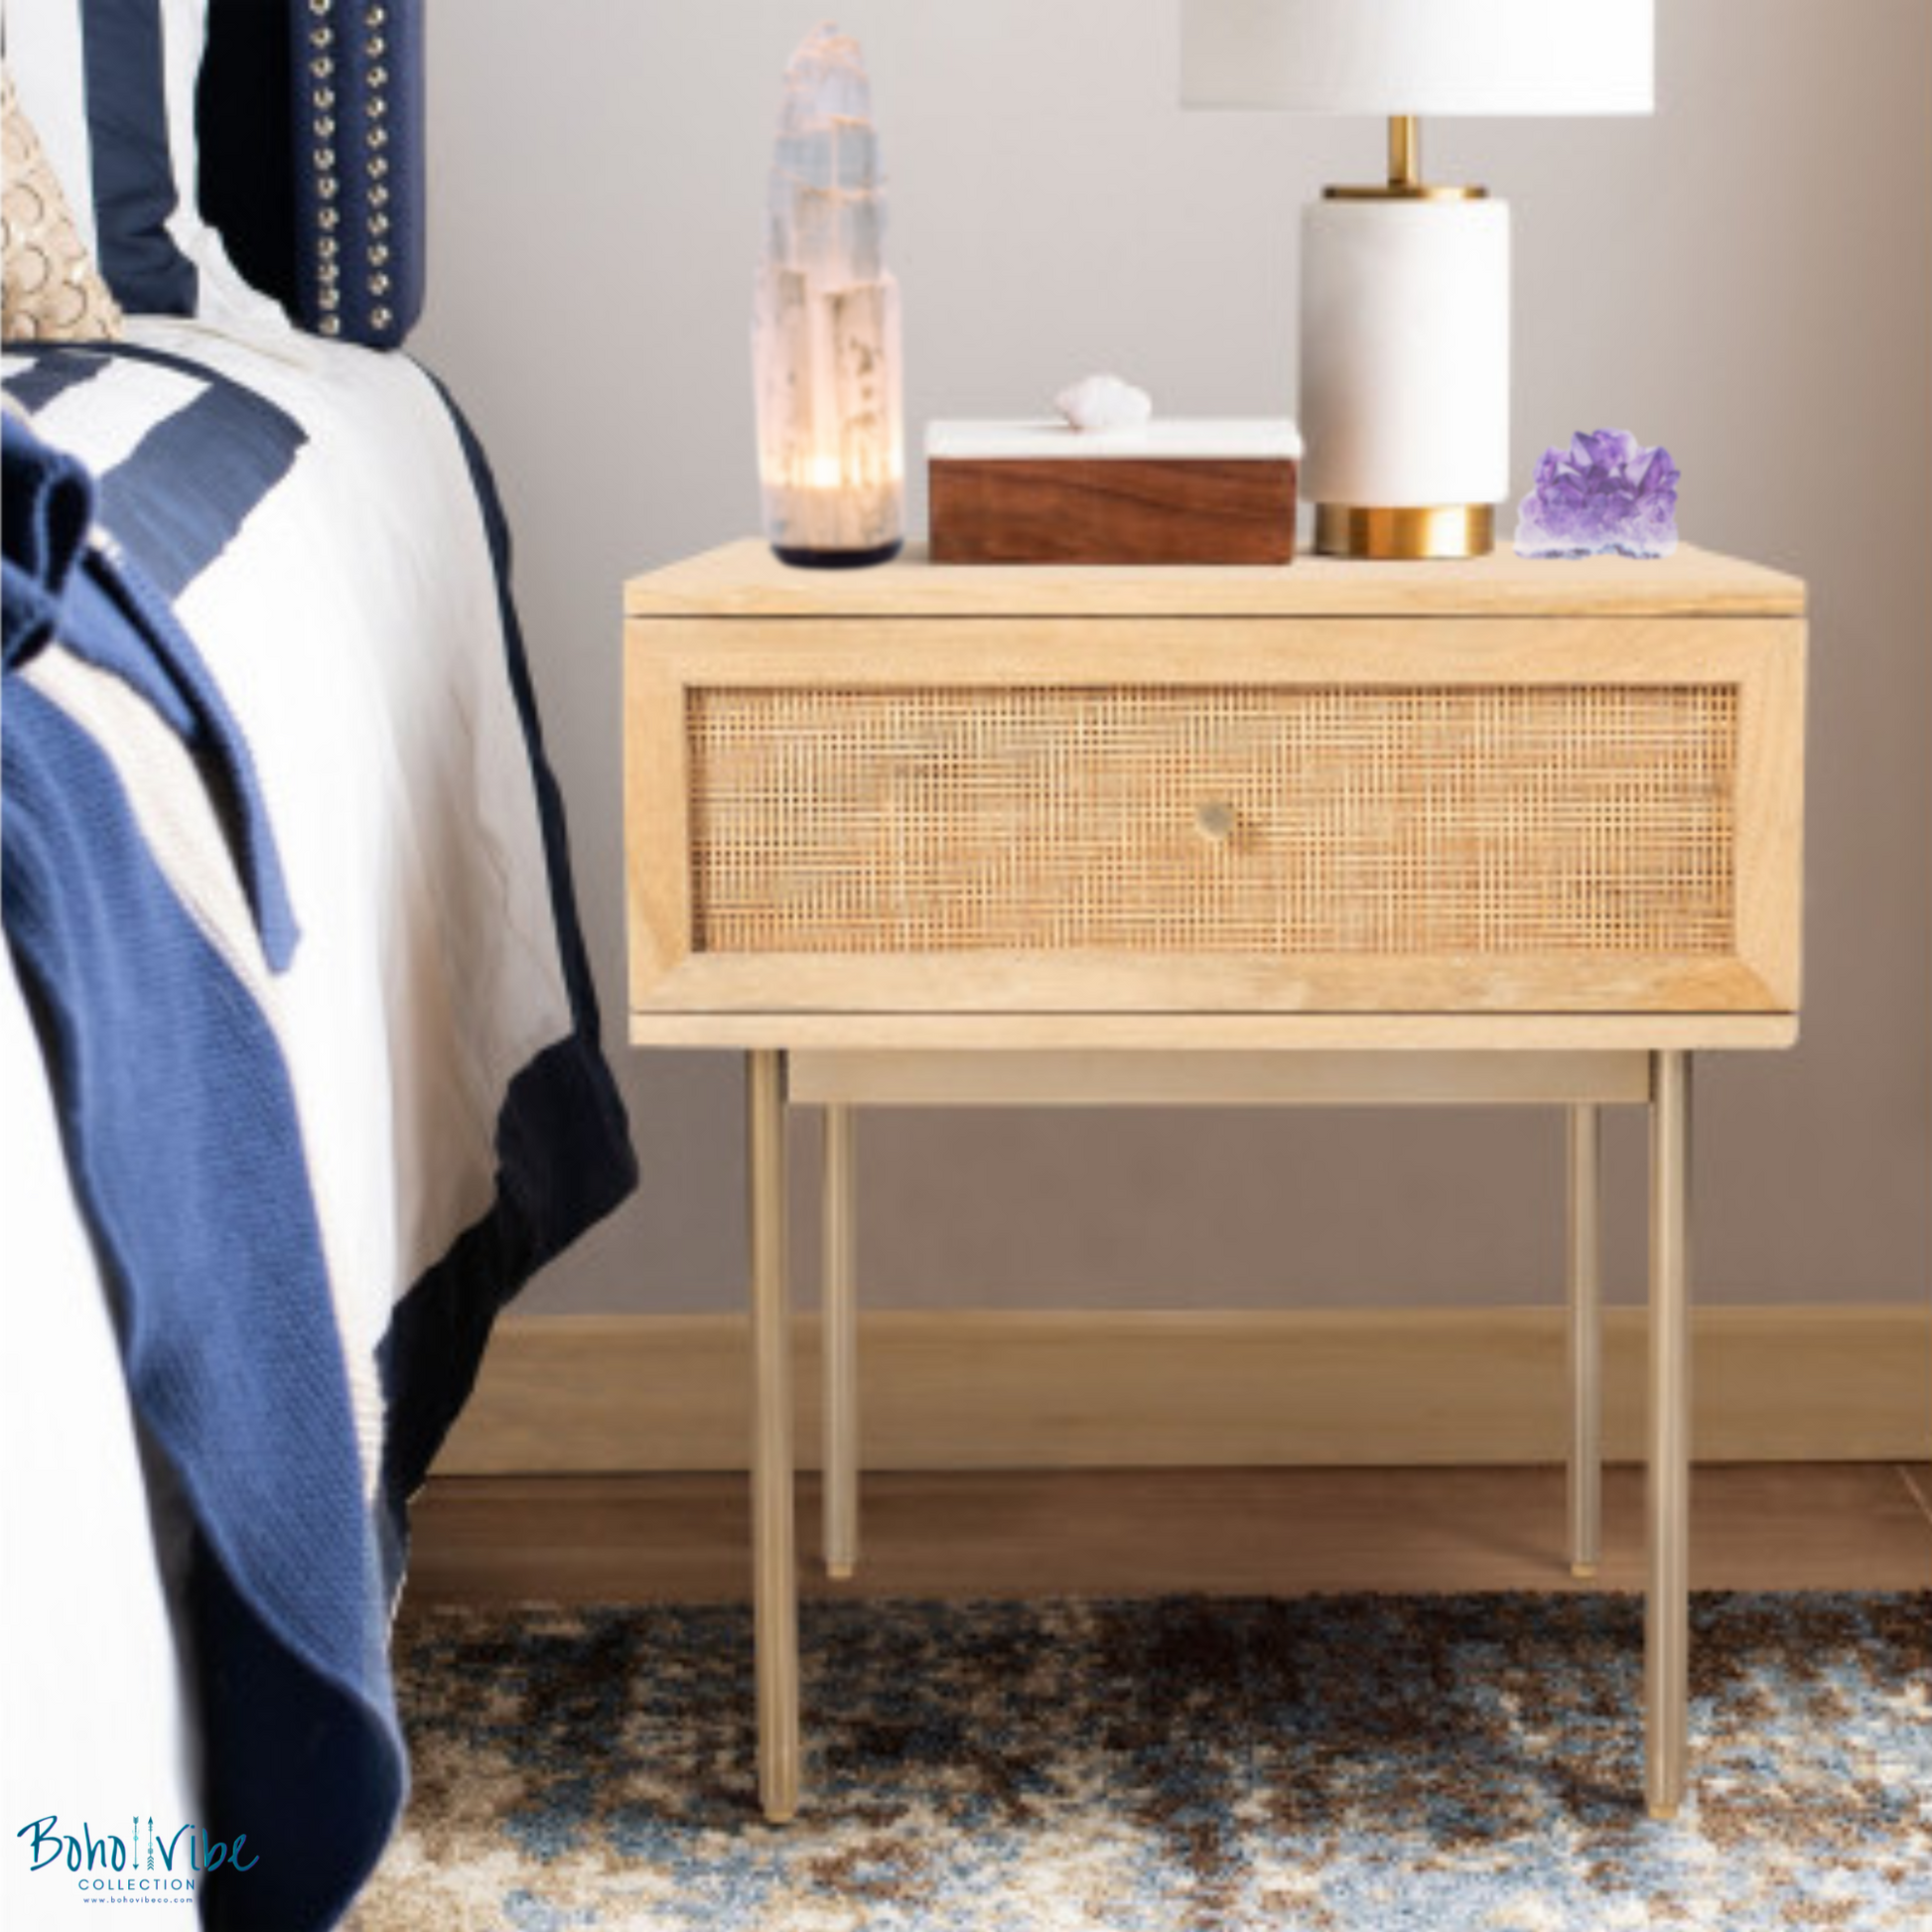 Boho ↡↟ Vibe Collection ↠ Rattan  Bohemian Bedside Table 1 Drawer Storage Wood Cabinet Set of 2 